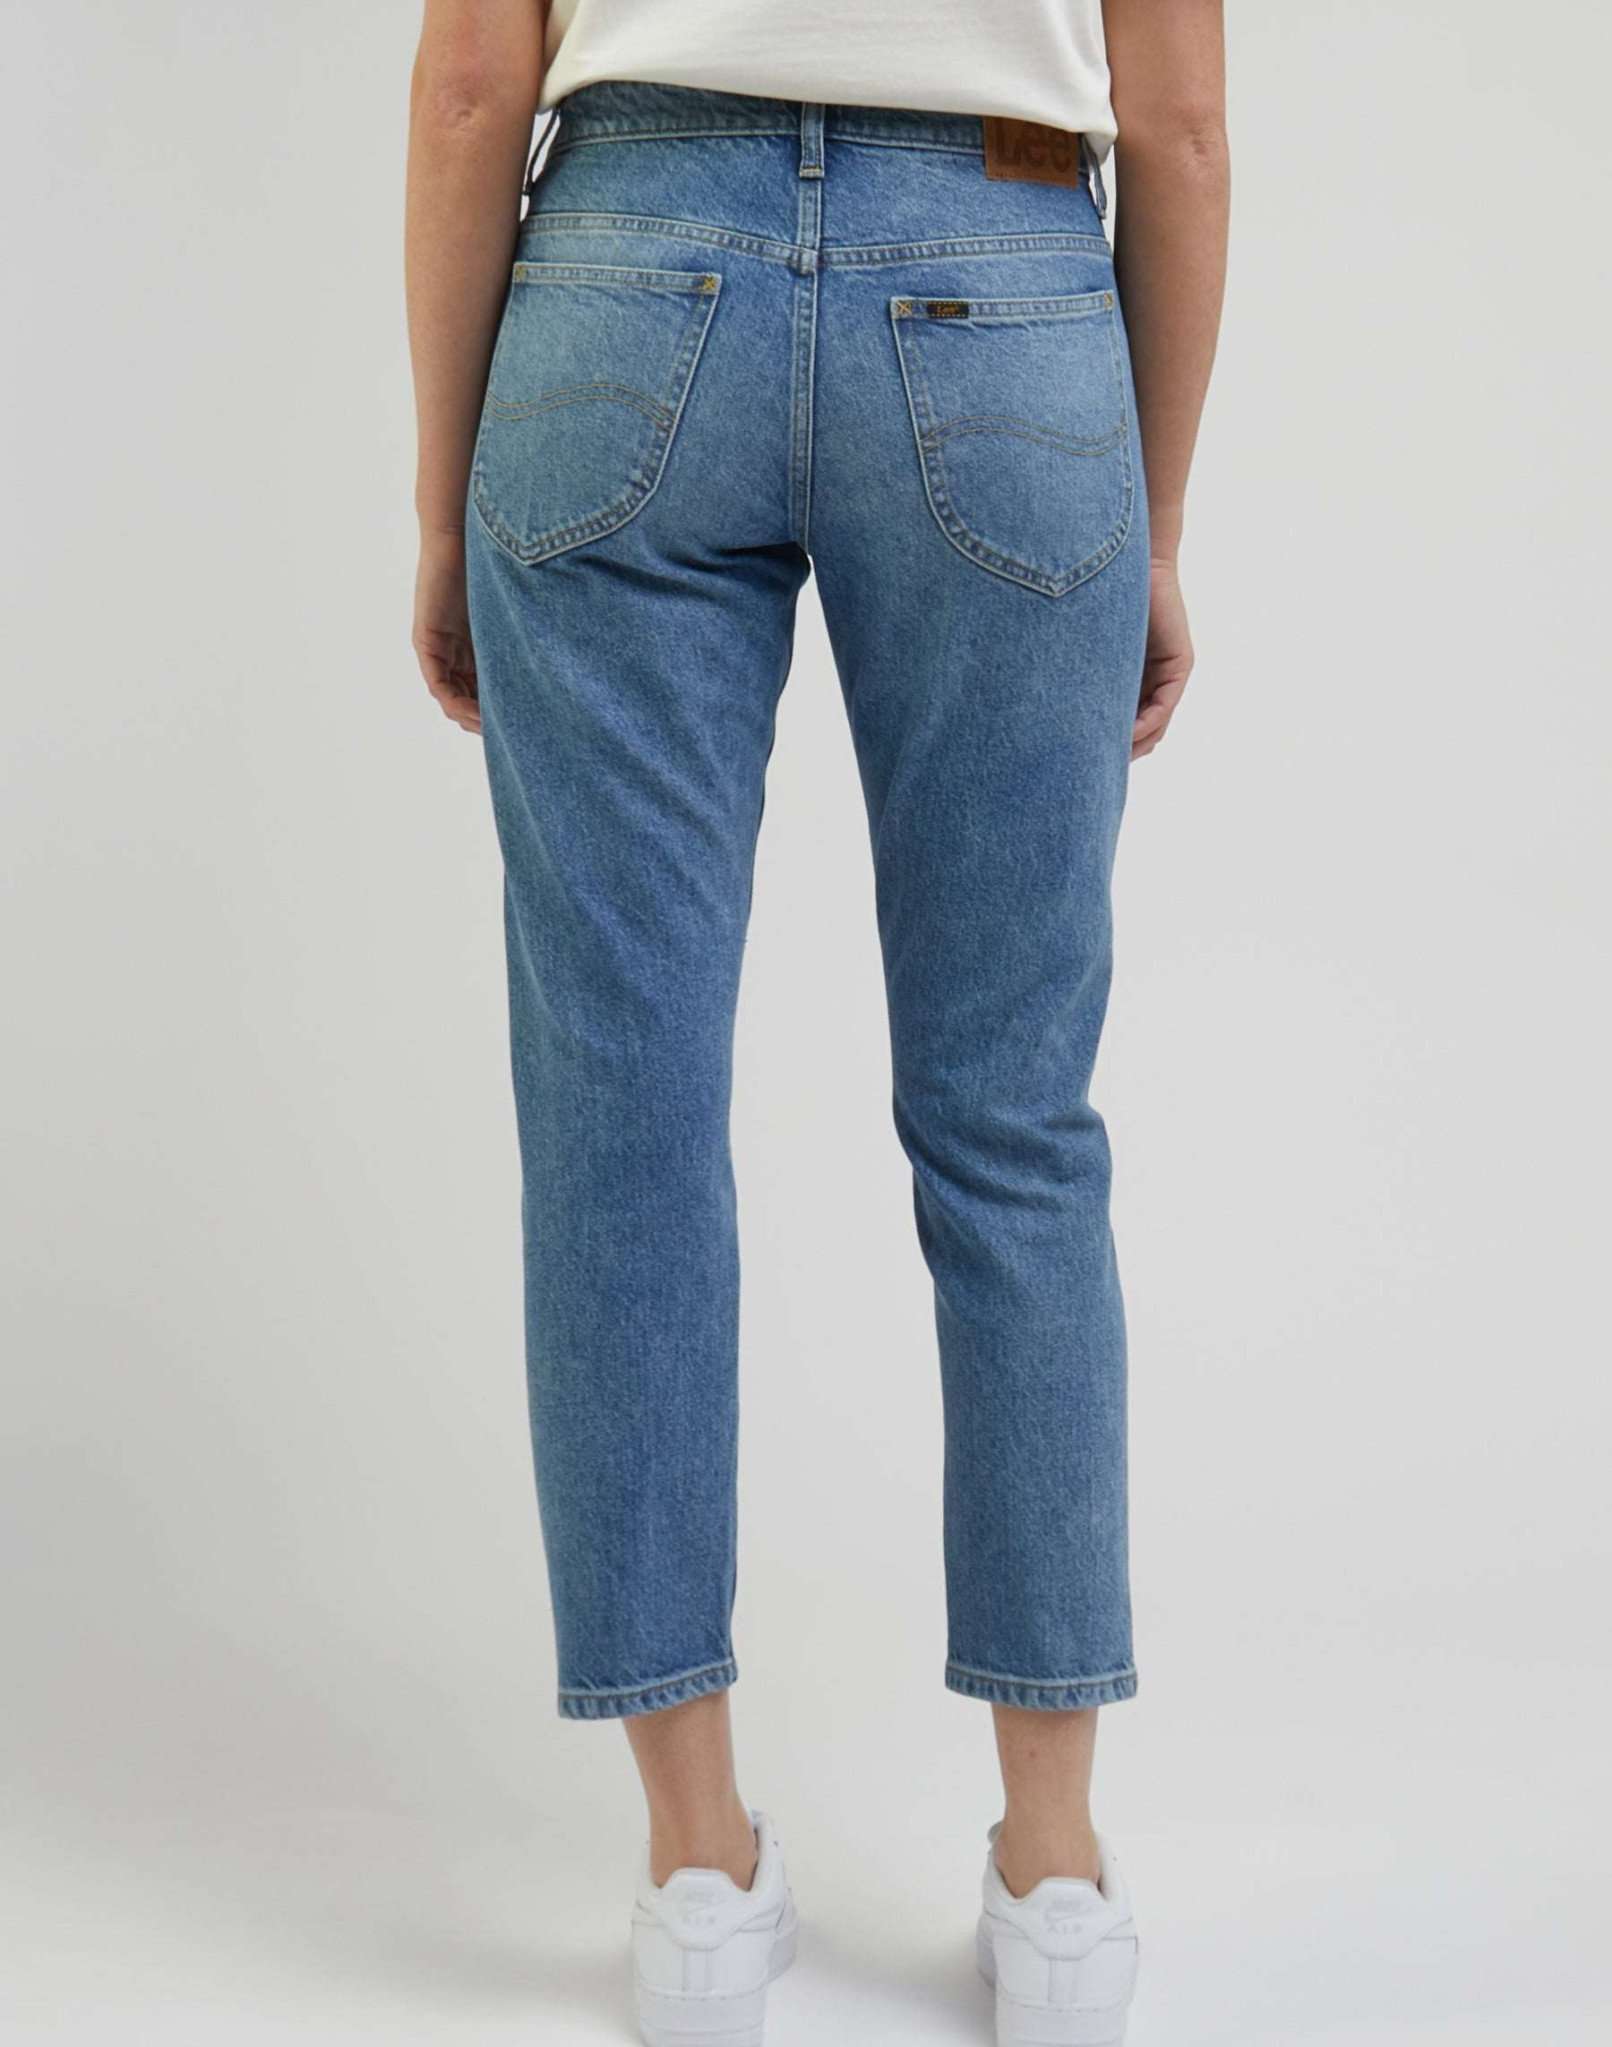 Rider Jeans in Modern Mid Jeans Lee   